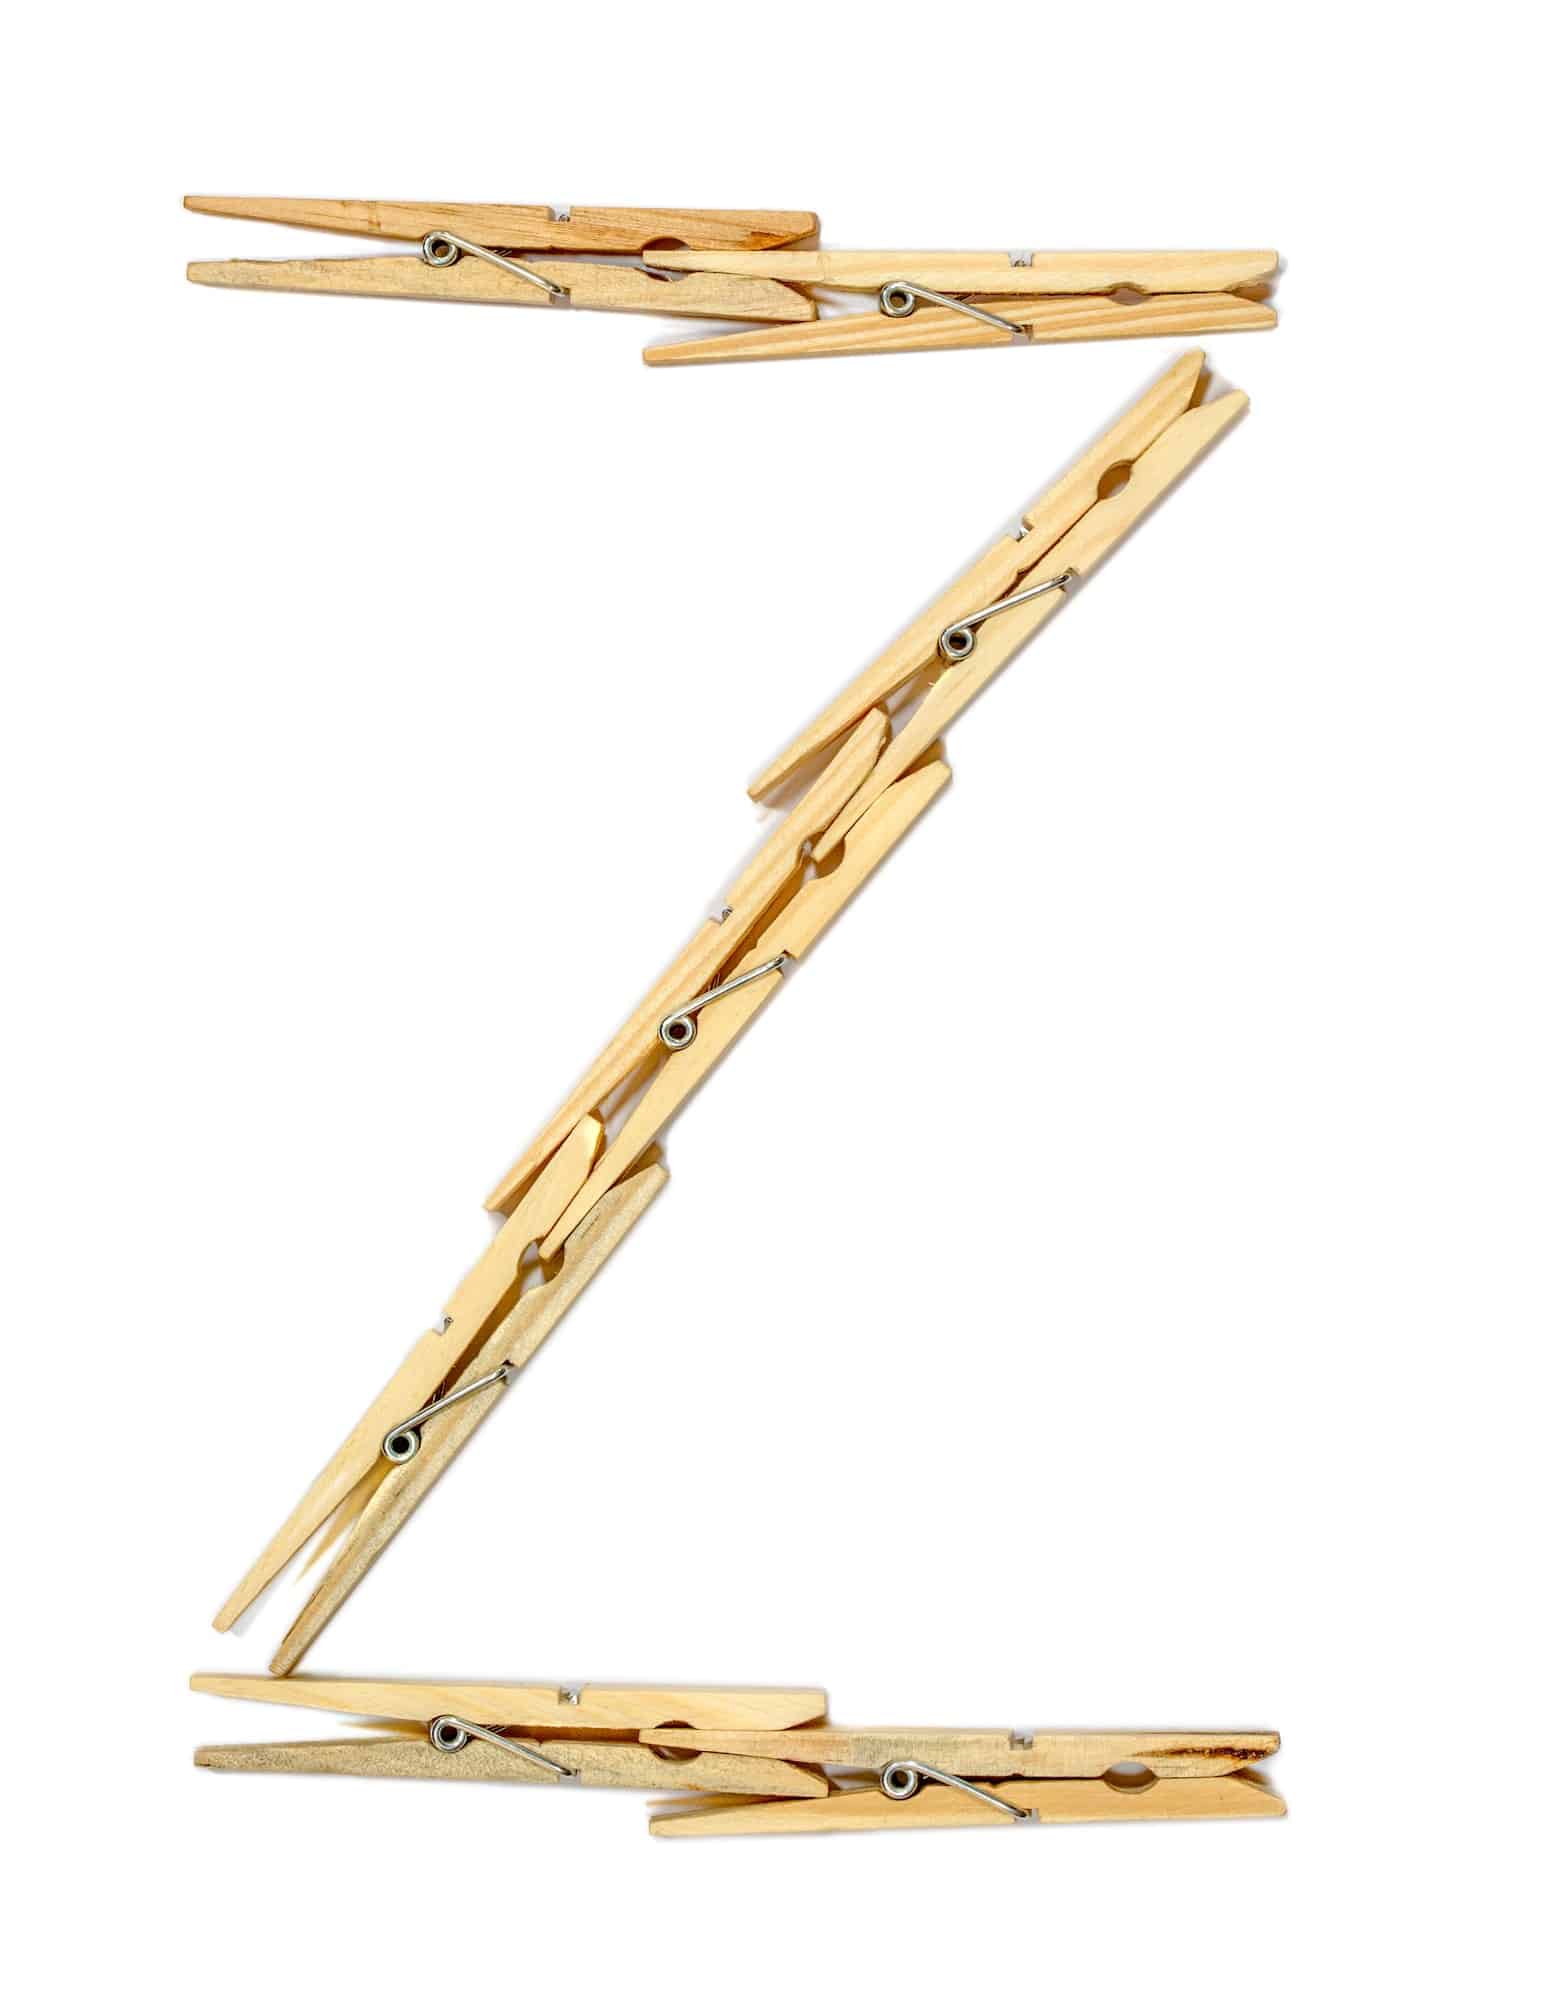 Clothespin letter Z